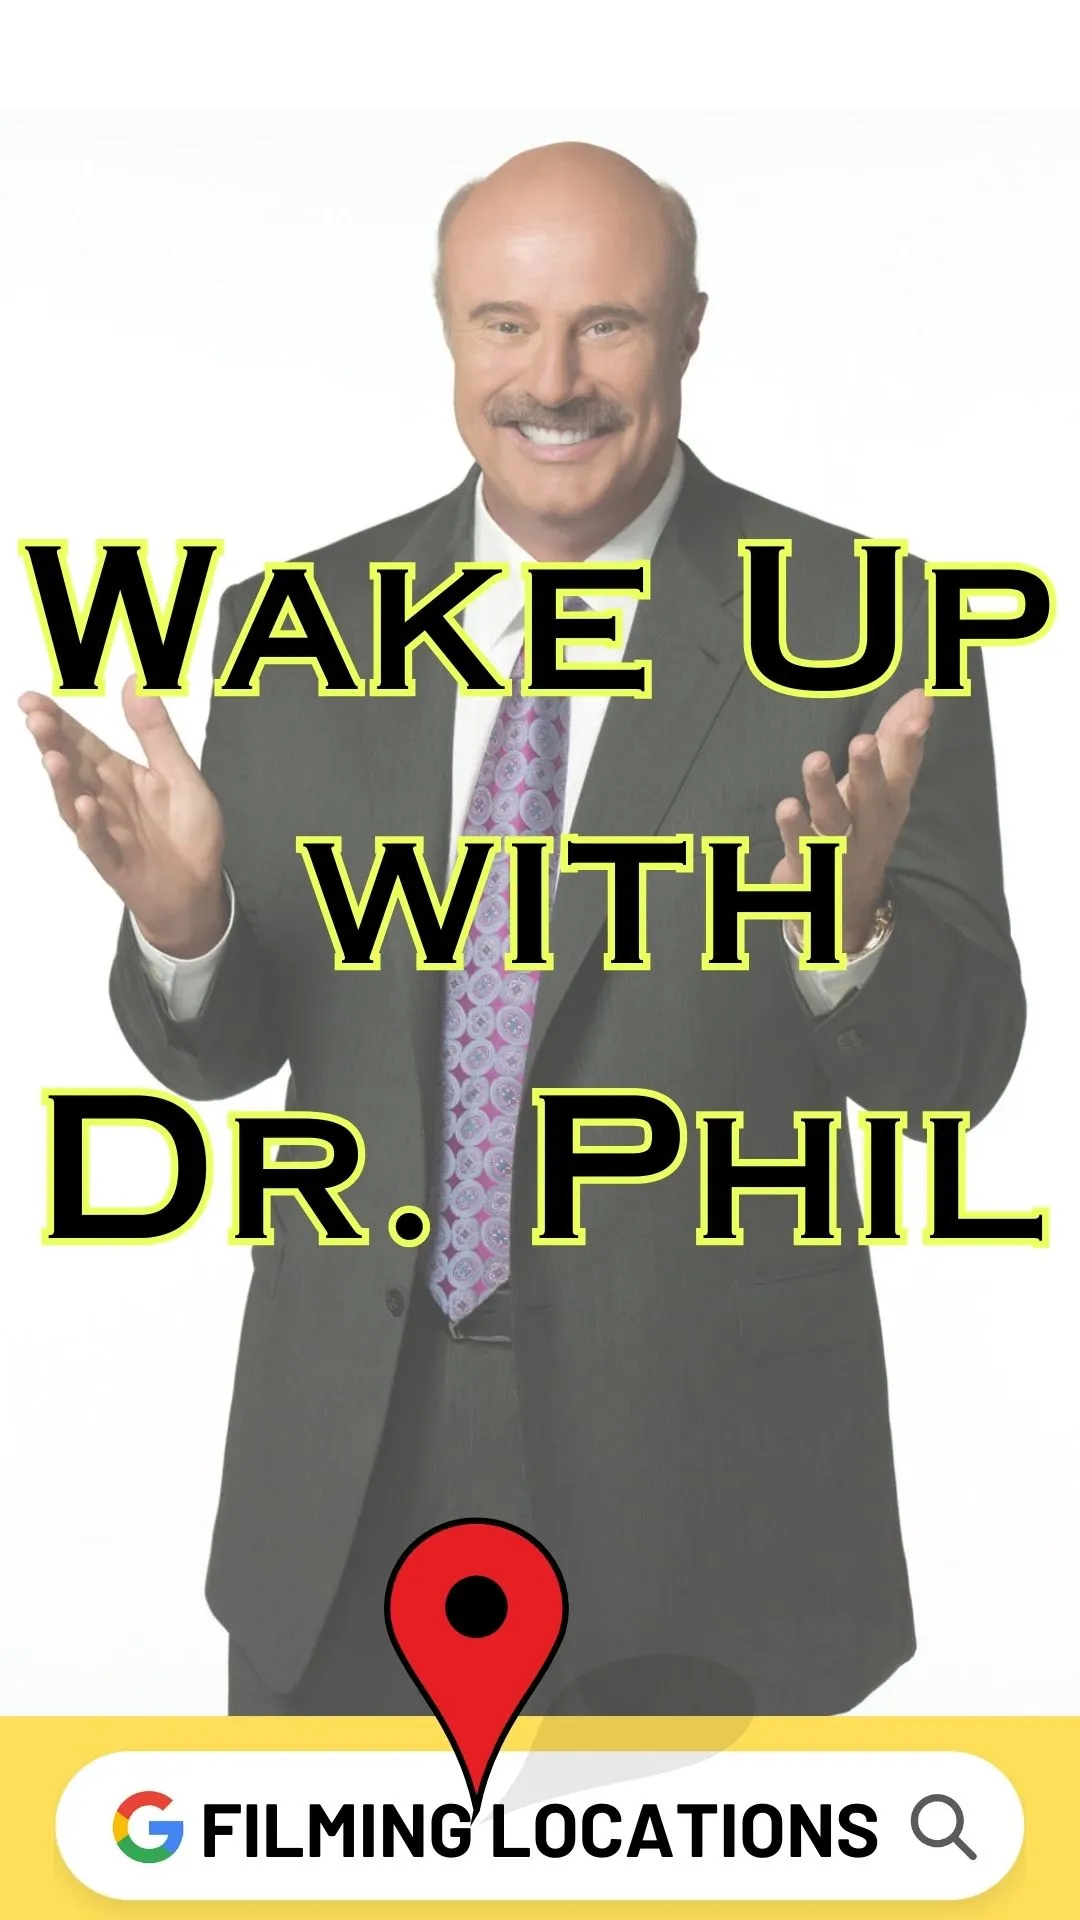 Wake Up with Dr. Phil Filming Locations